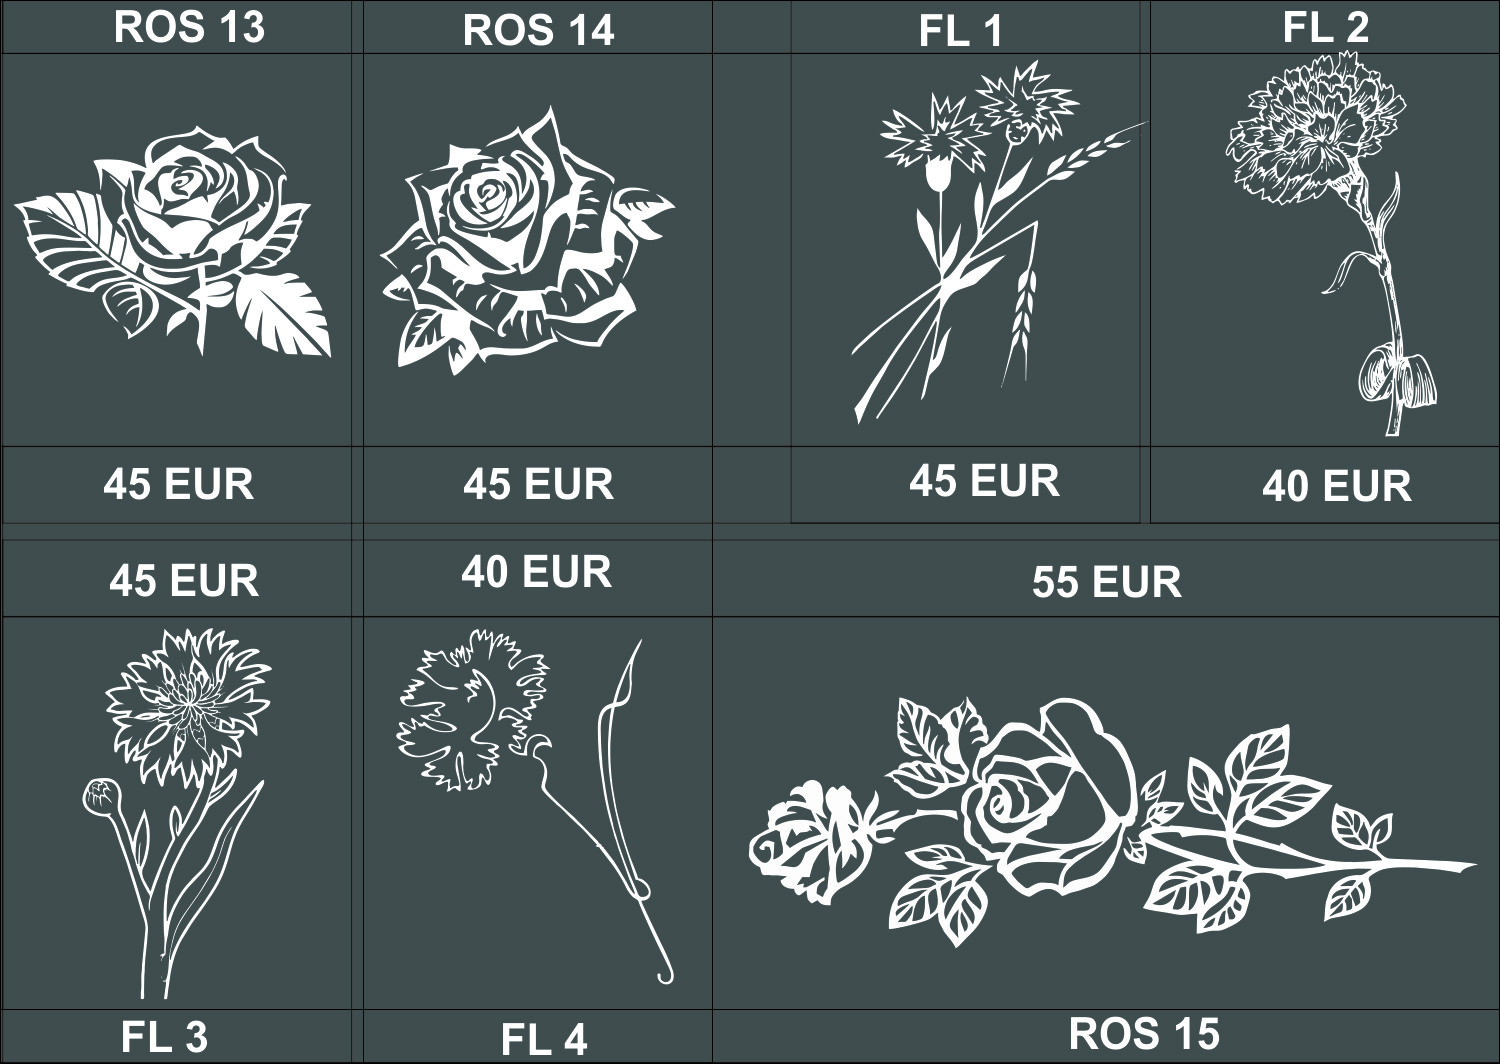 roses%202%20and%20flowers%20-%20Copy.jpg